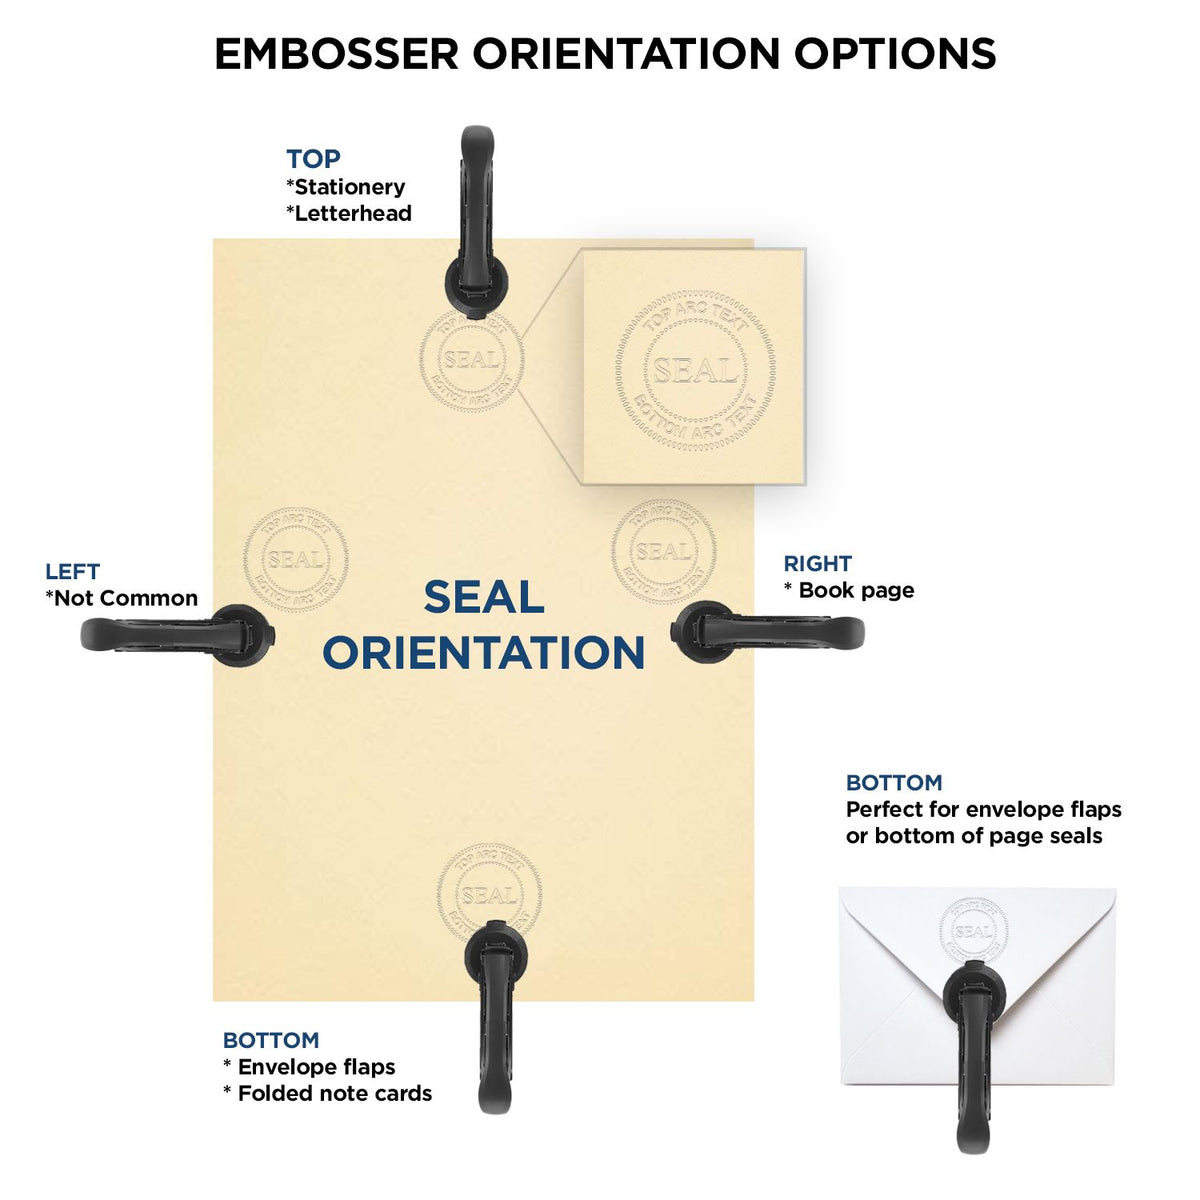 An infographic for the Long Reach Arizona PE Seal showing embosser orientation, this is showing examples of a top, bottom, right and left insert.